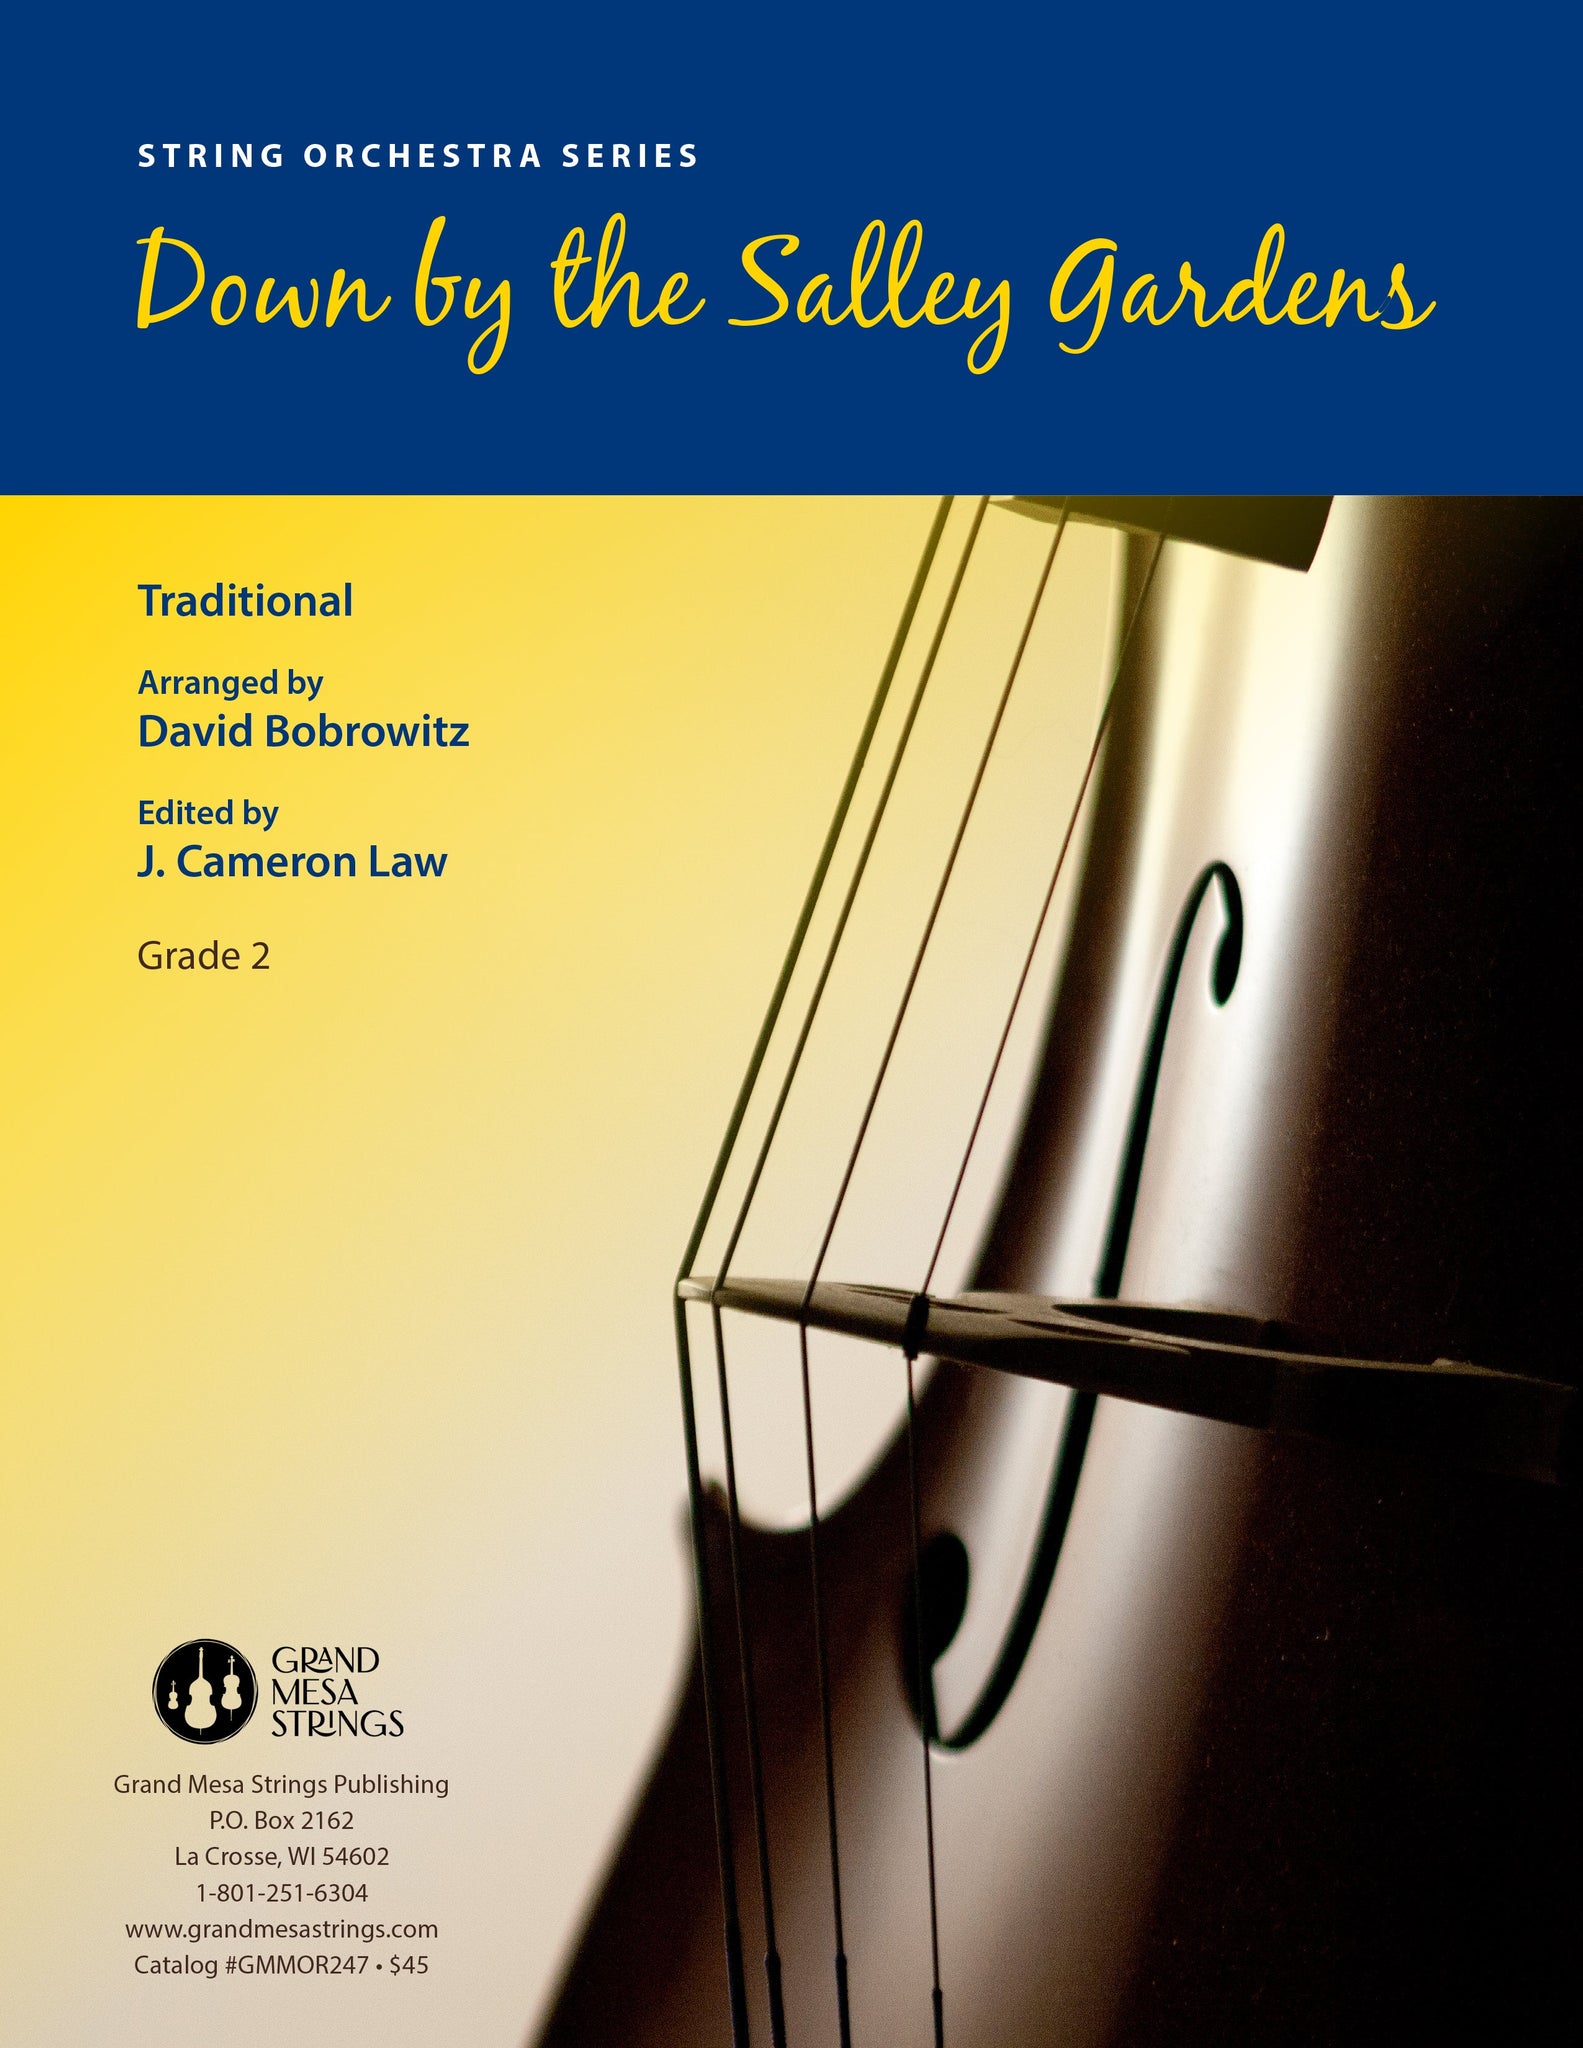 Strings sheet music cover of Down by the Salley Gardens, arranged by David Bobrowitz.